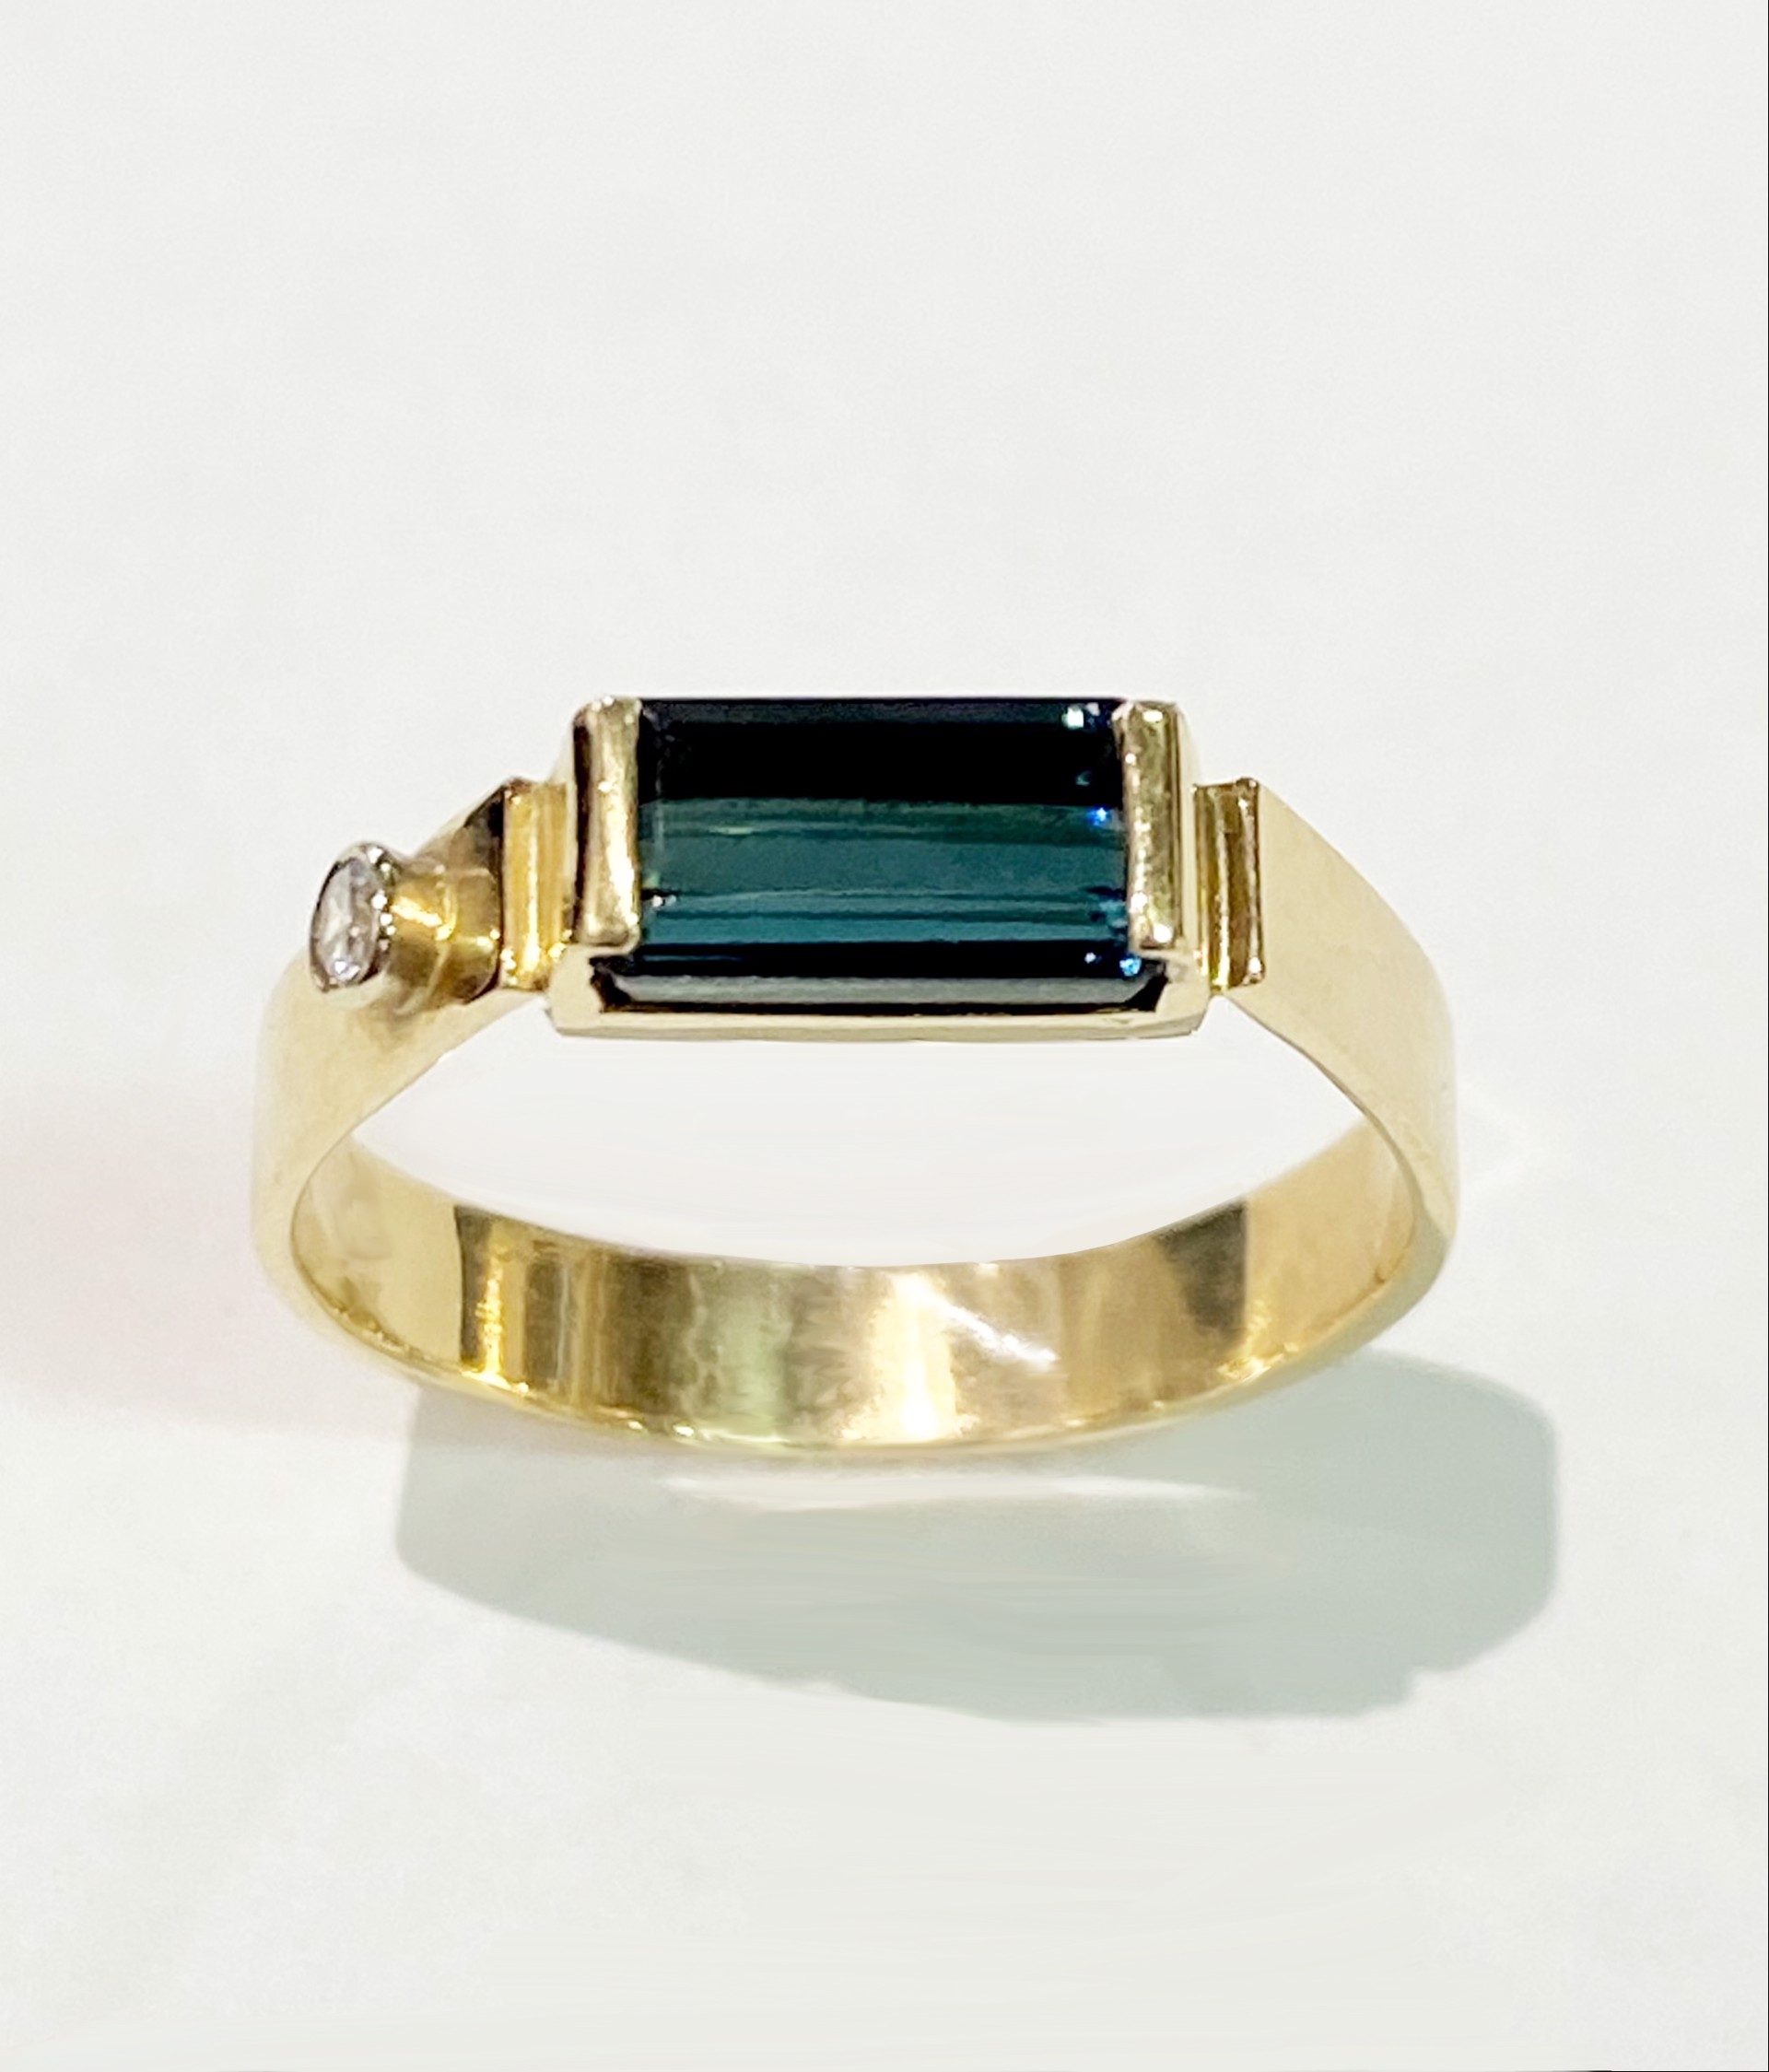 Green Tourmaline Ring by D'ETTE DELFORGE